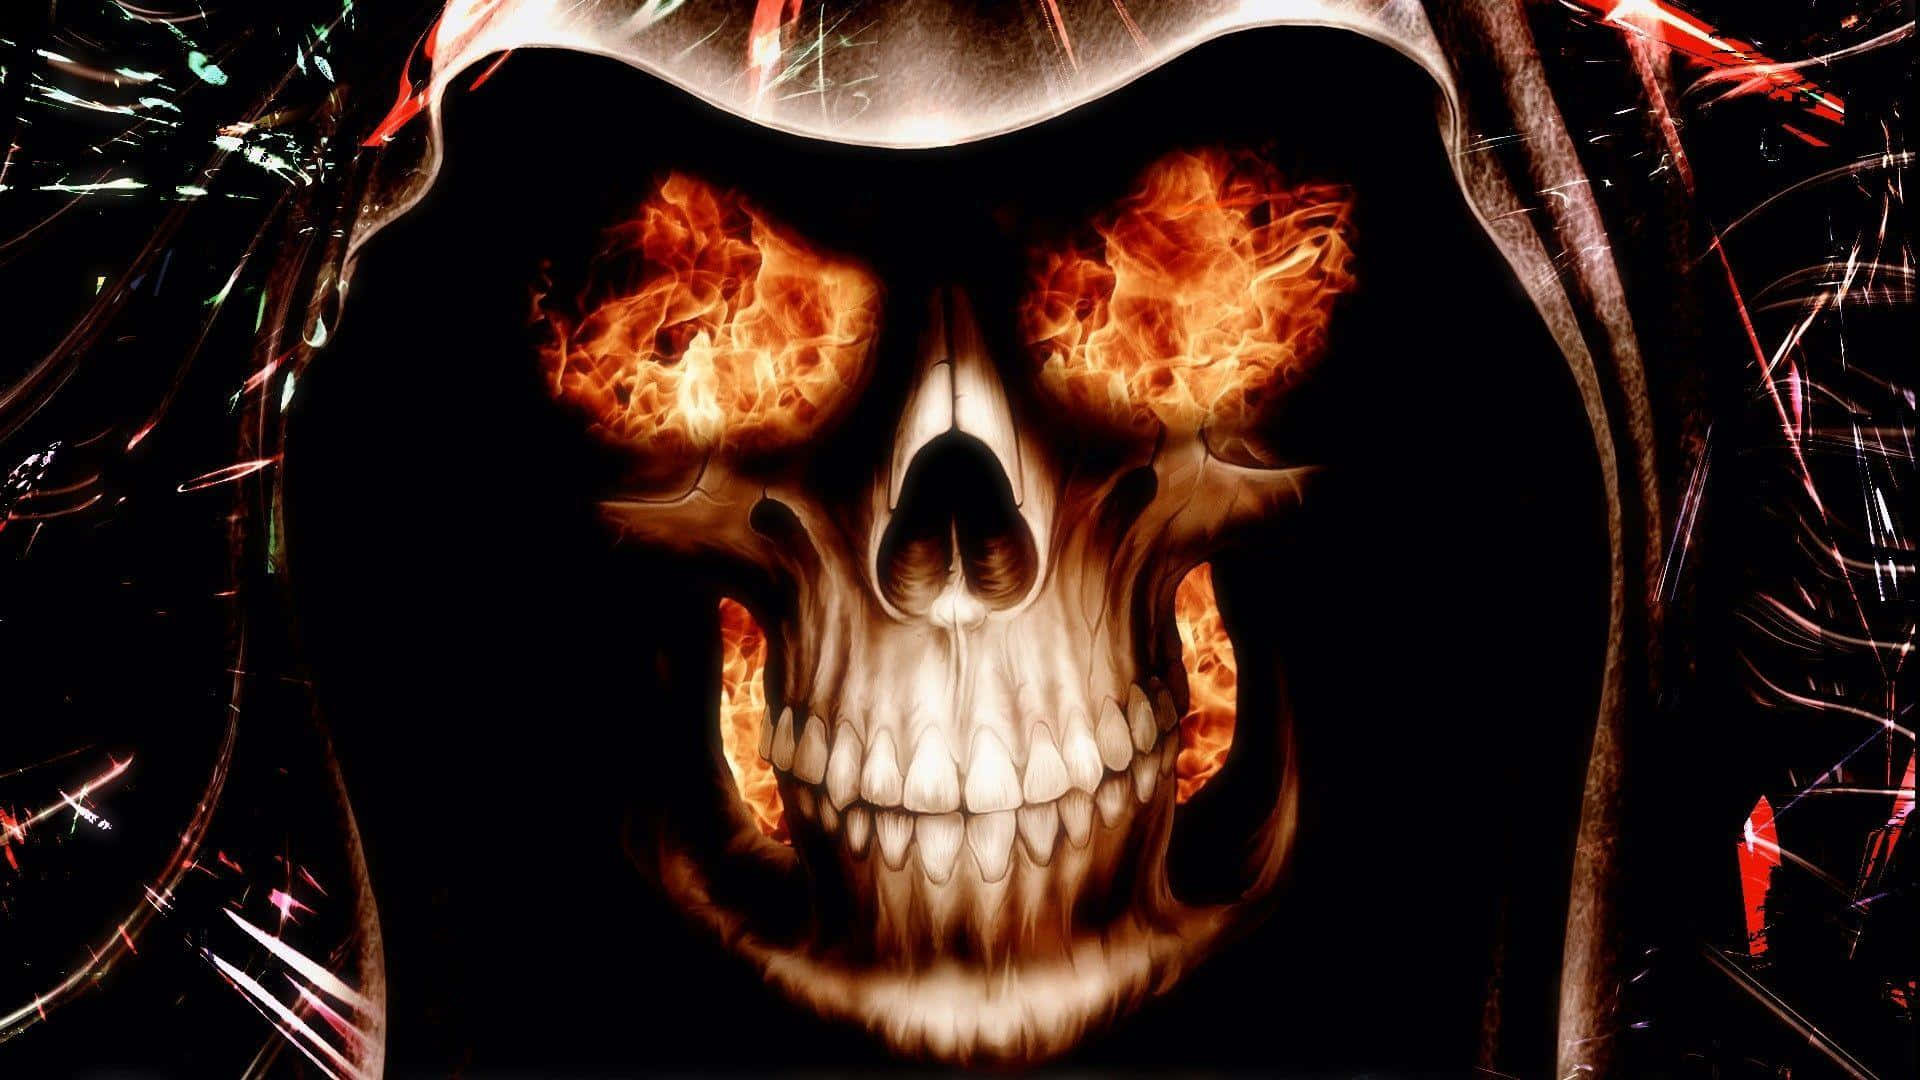 "A fiery and imposing skull shrouded in flames." Wallpaper